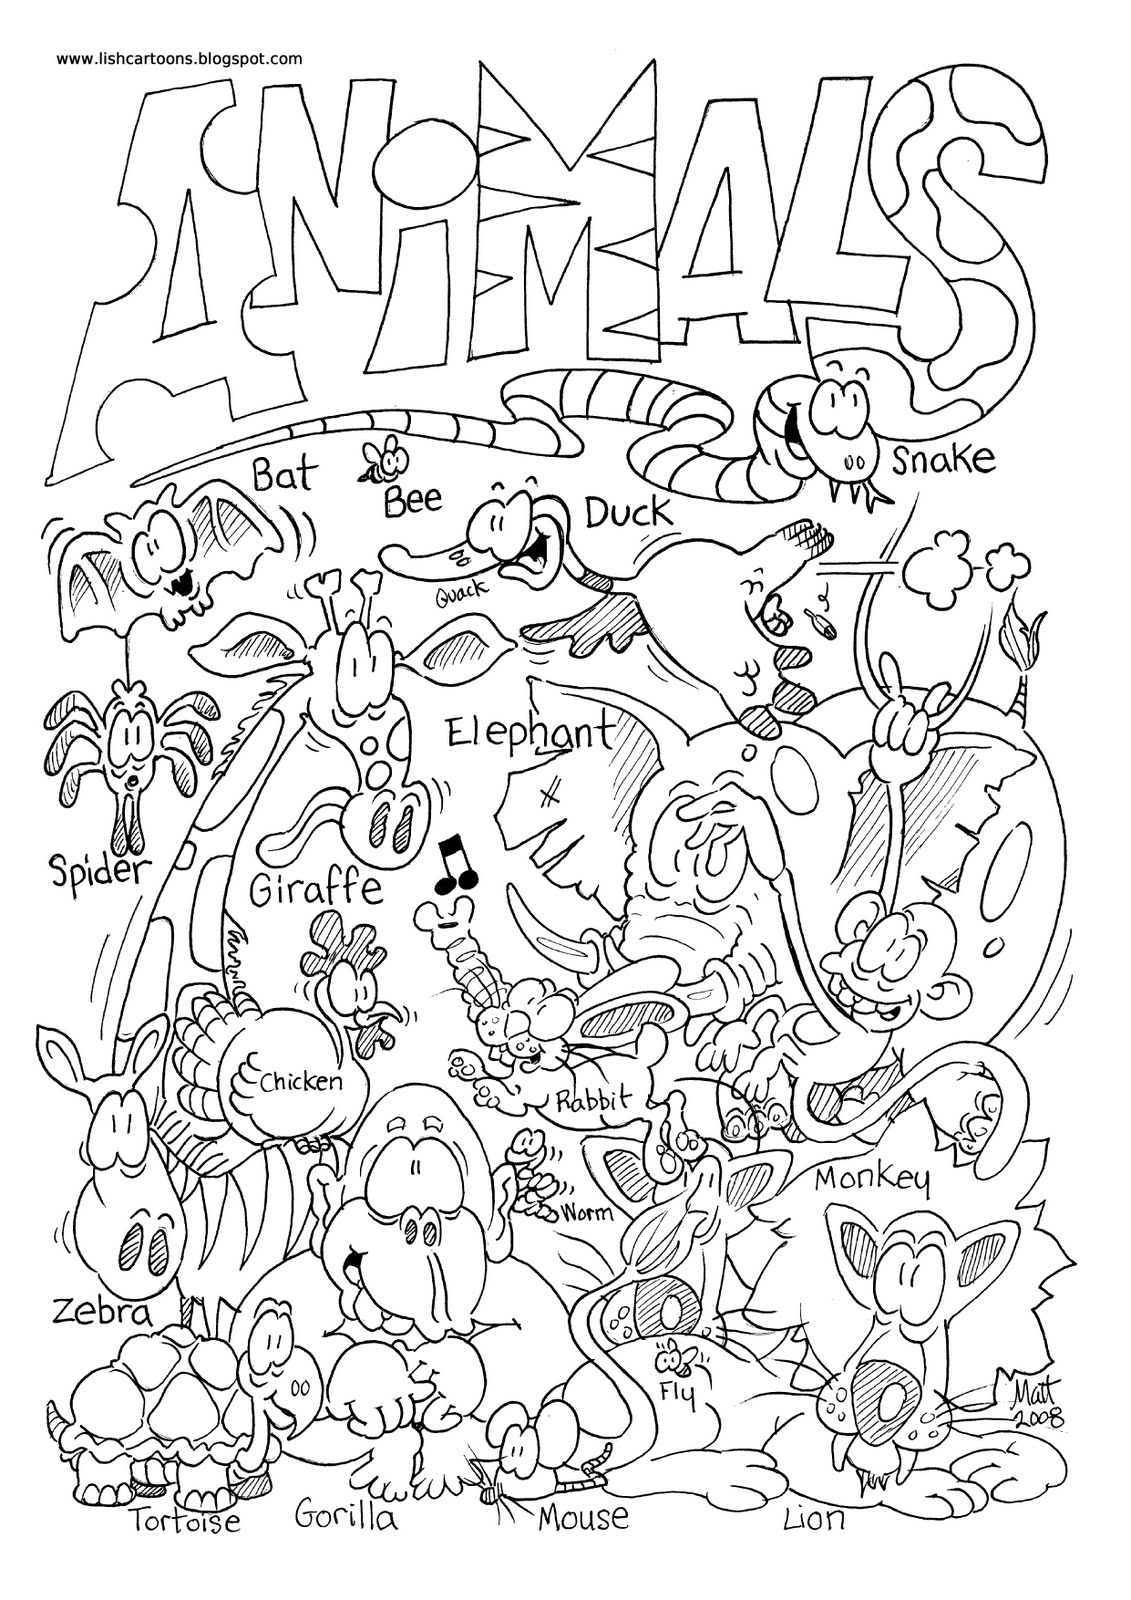 Slipper-pink: Free Printable Coloring Pages Zoo Animals